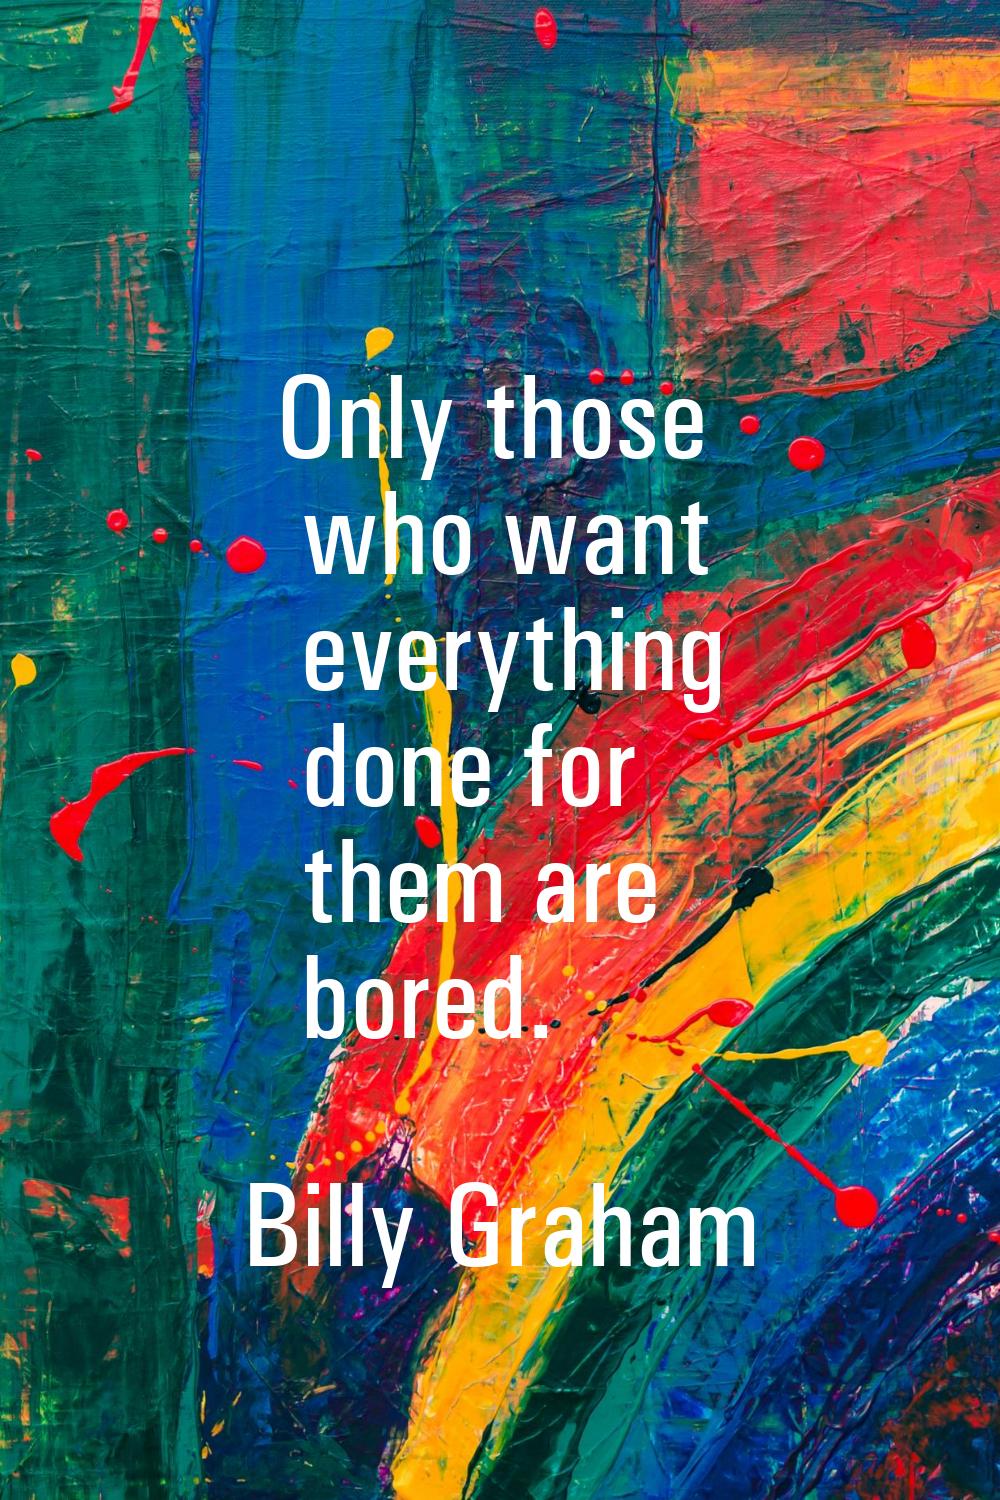 Only those who want everything done for them are bored.